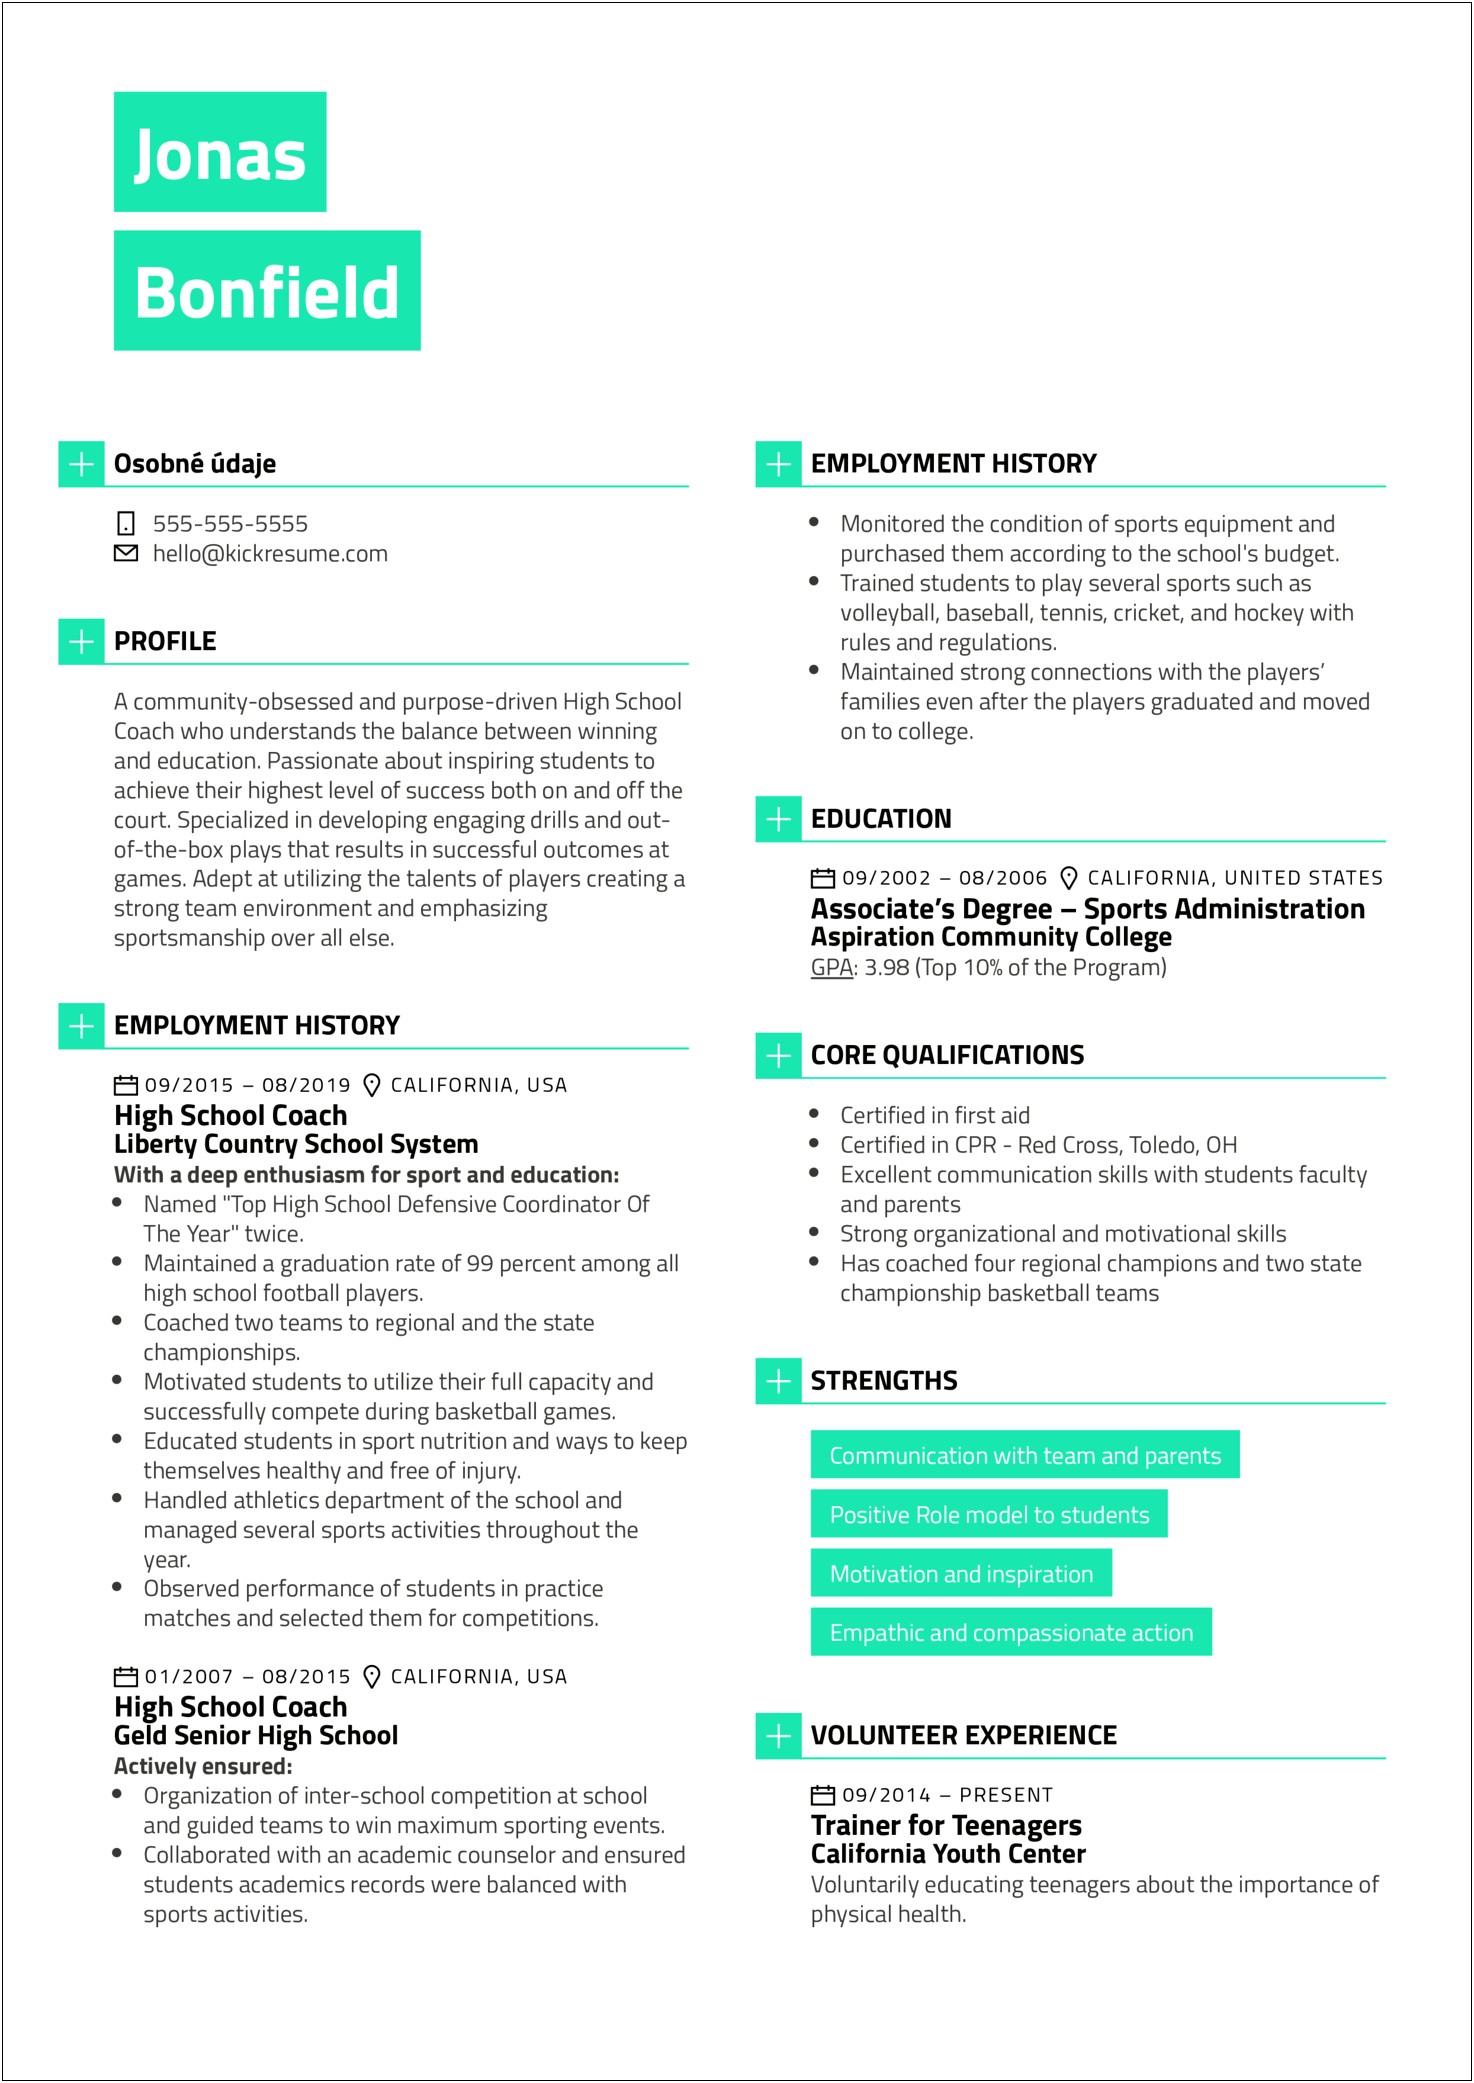 Resume Writing Samples For Highschool Students